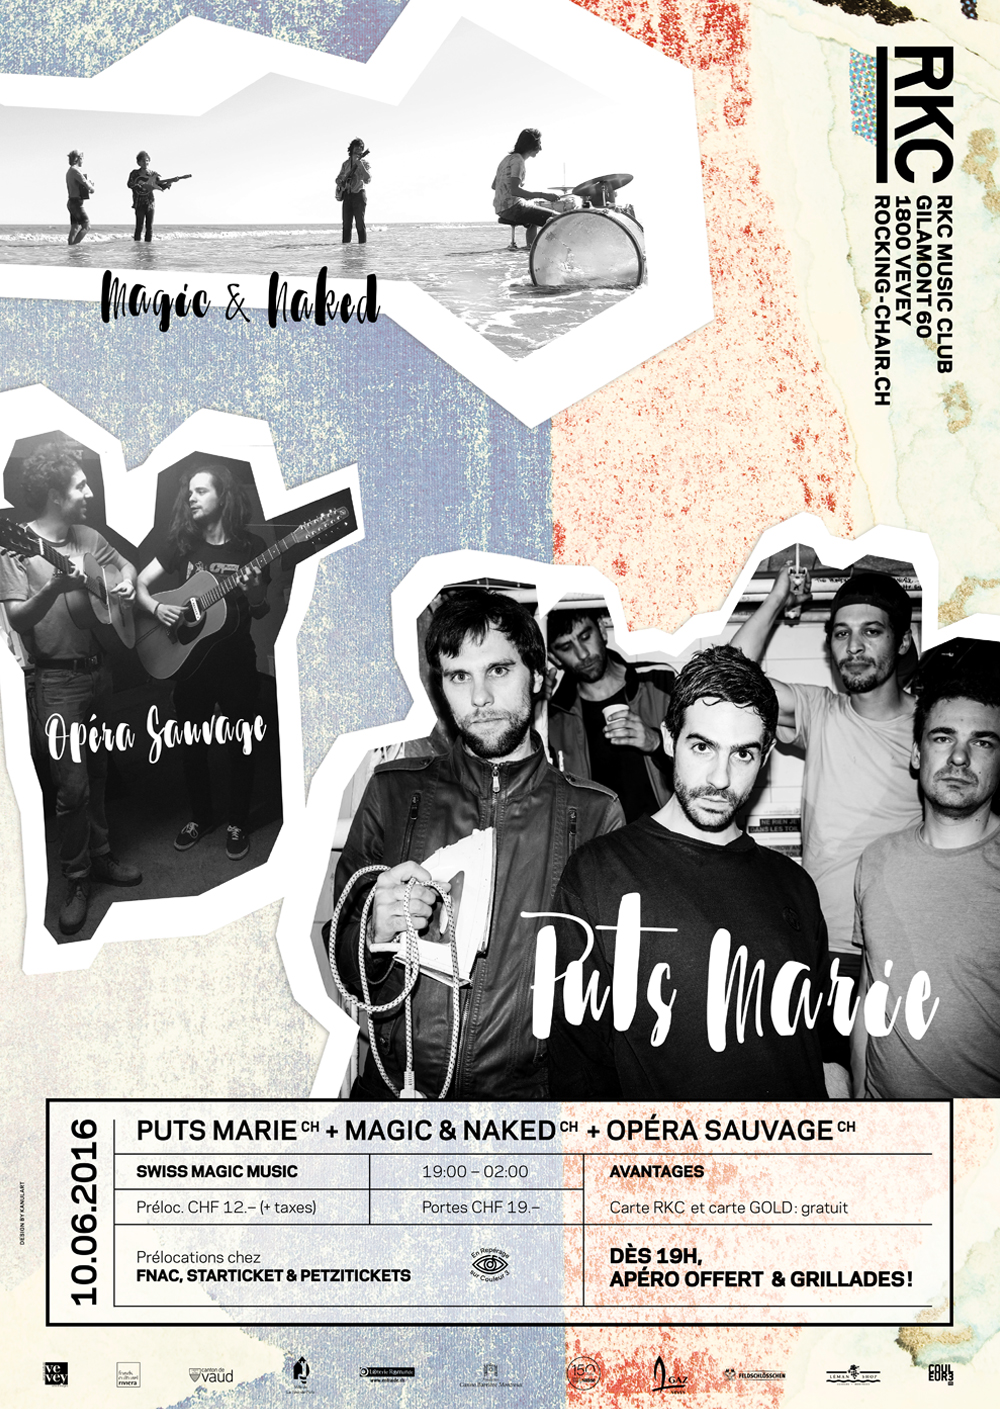 PUTS MARIE (CH) + MAGIC & NAKED (CH) + OPERA SAUVAGE (CH) - Rocking Chair Vevey